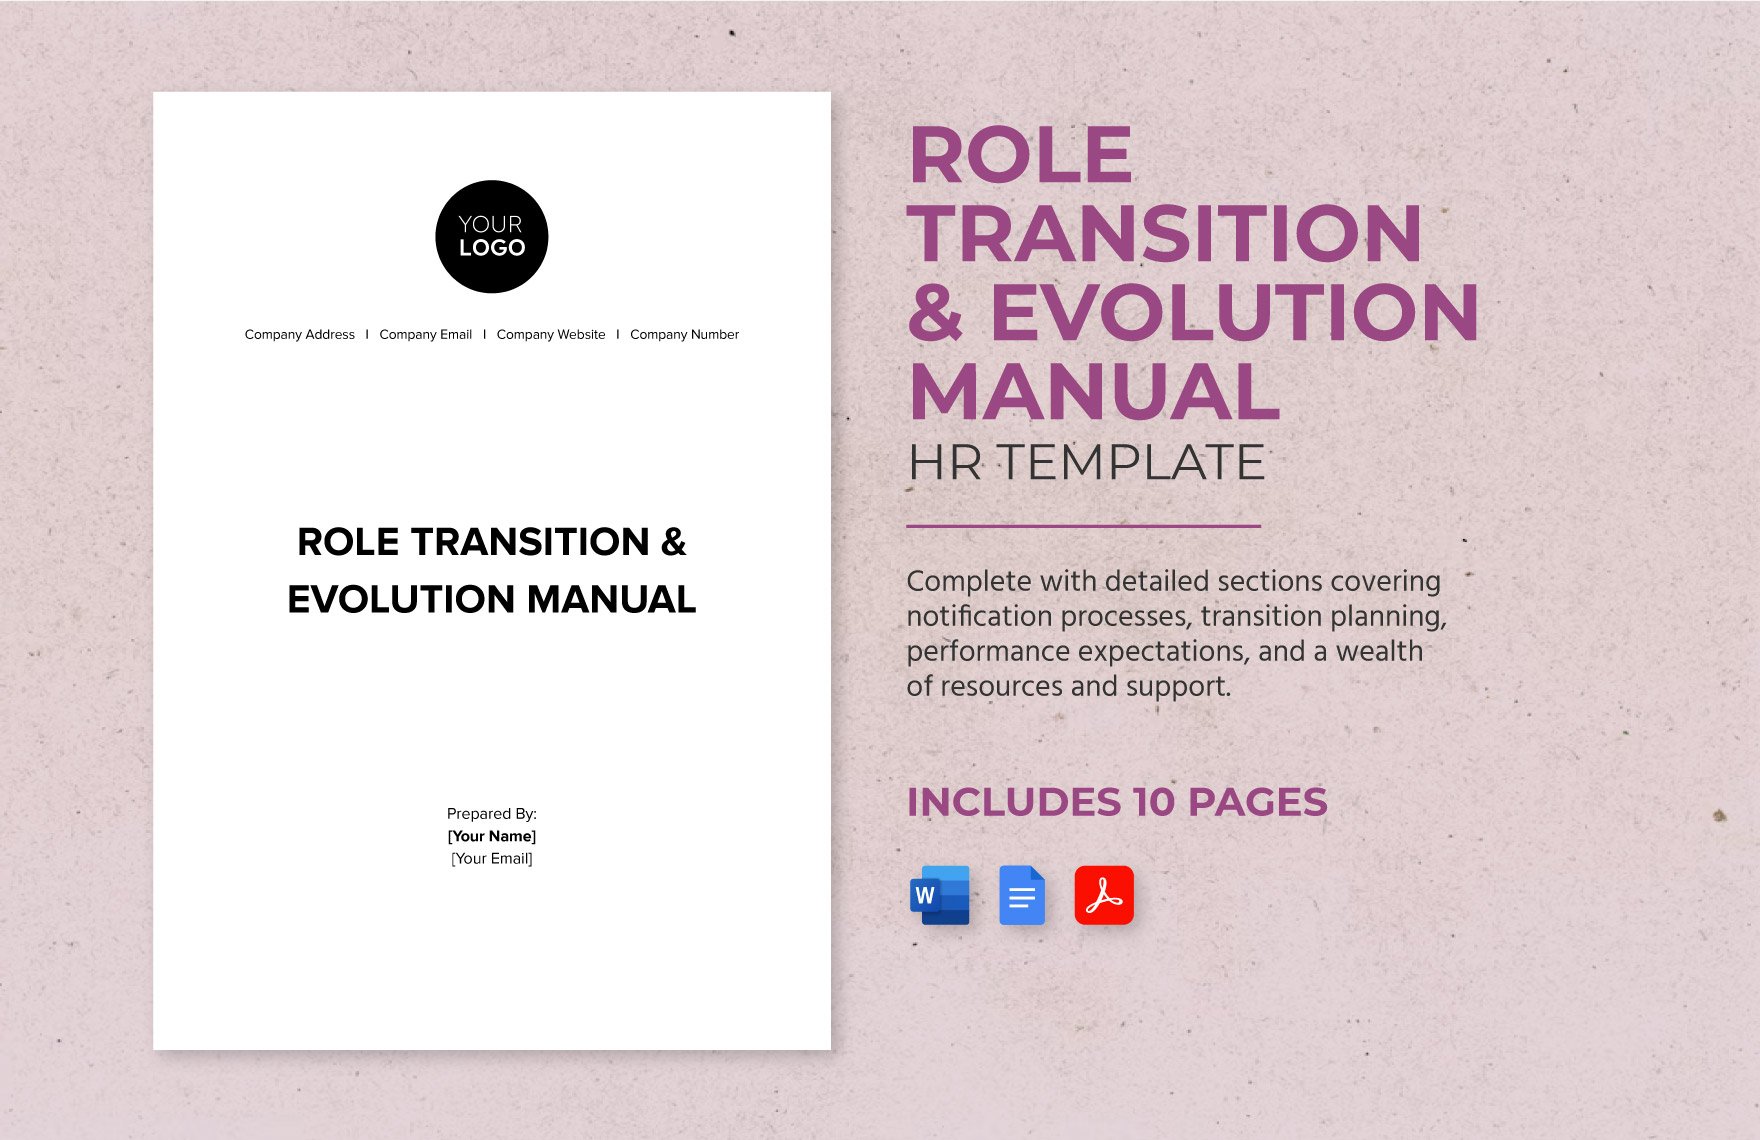 Role Transition & Evolution Manual HR Template in Word, Google Docs, PDF